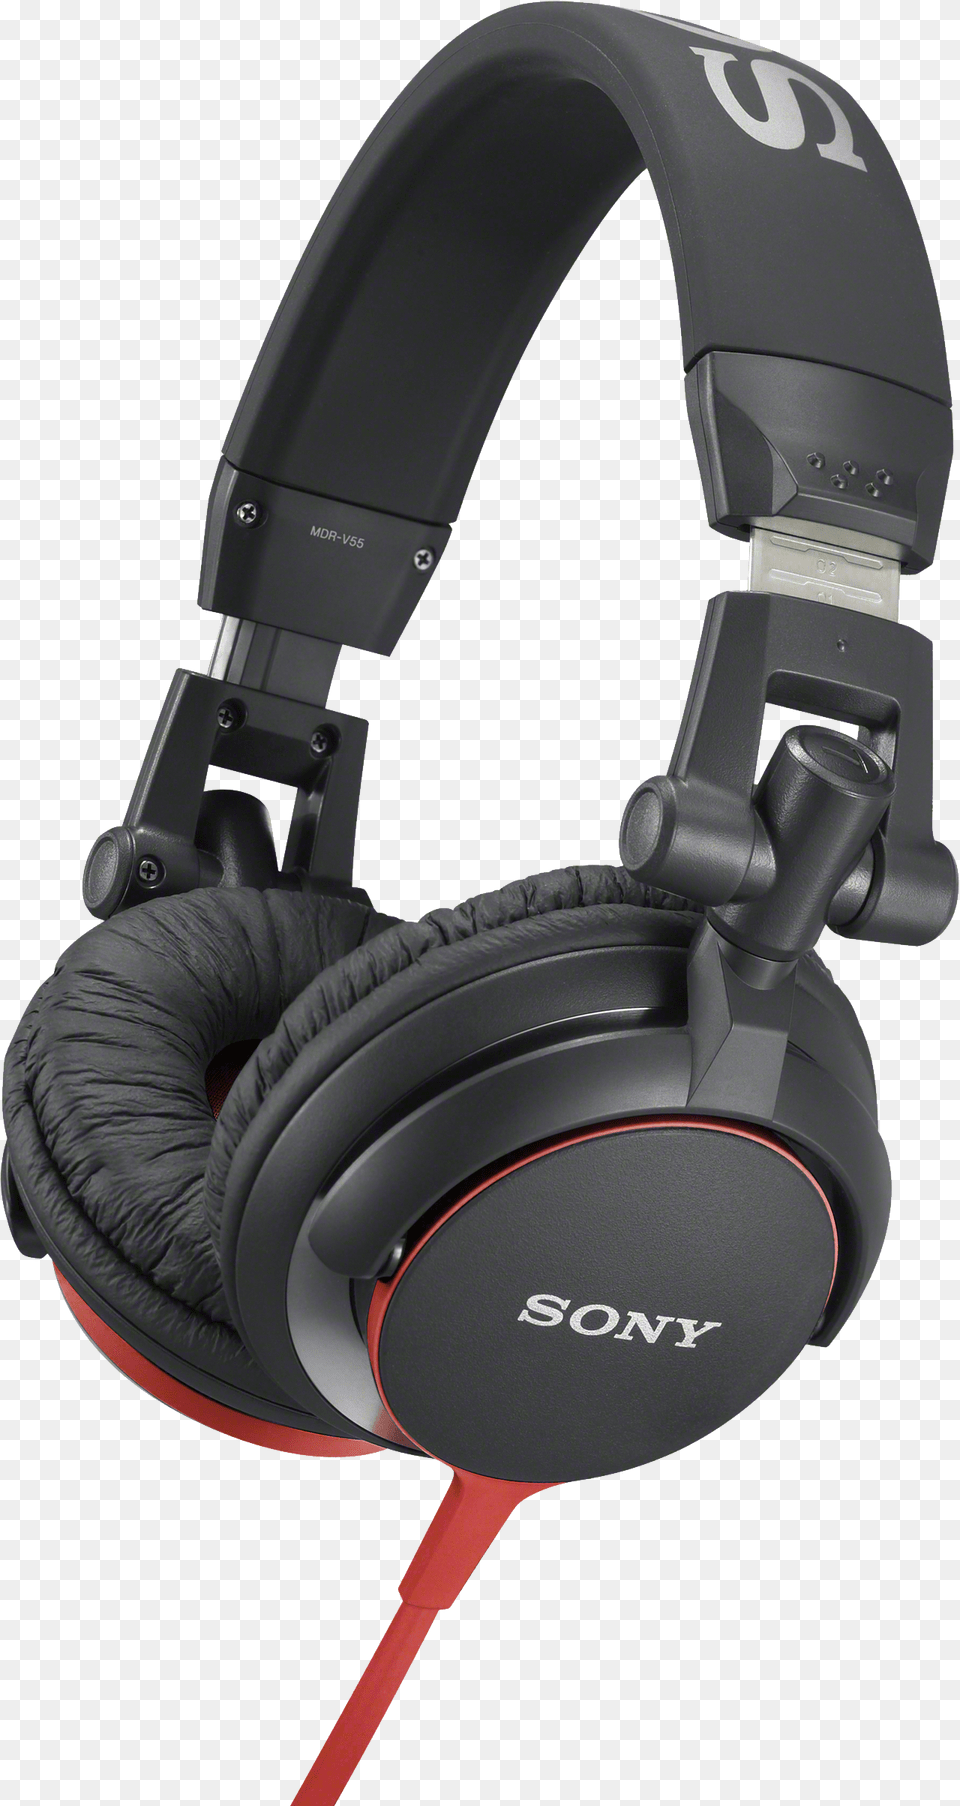 Headphones Image Sony Mdr, Electronics Png